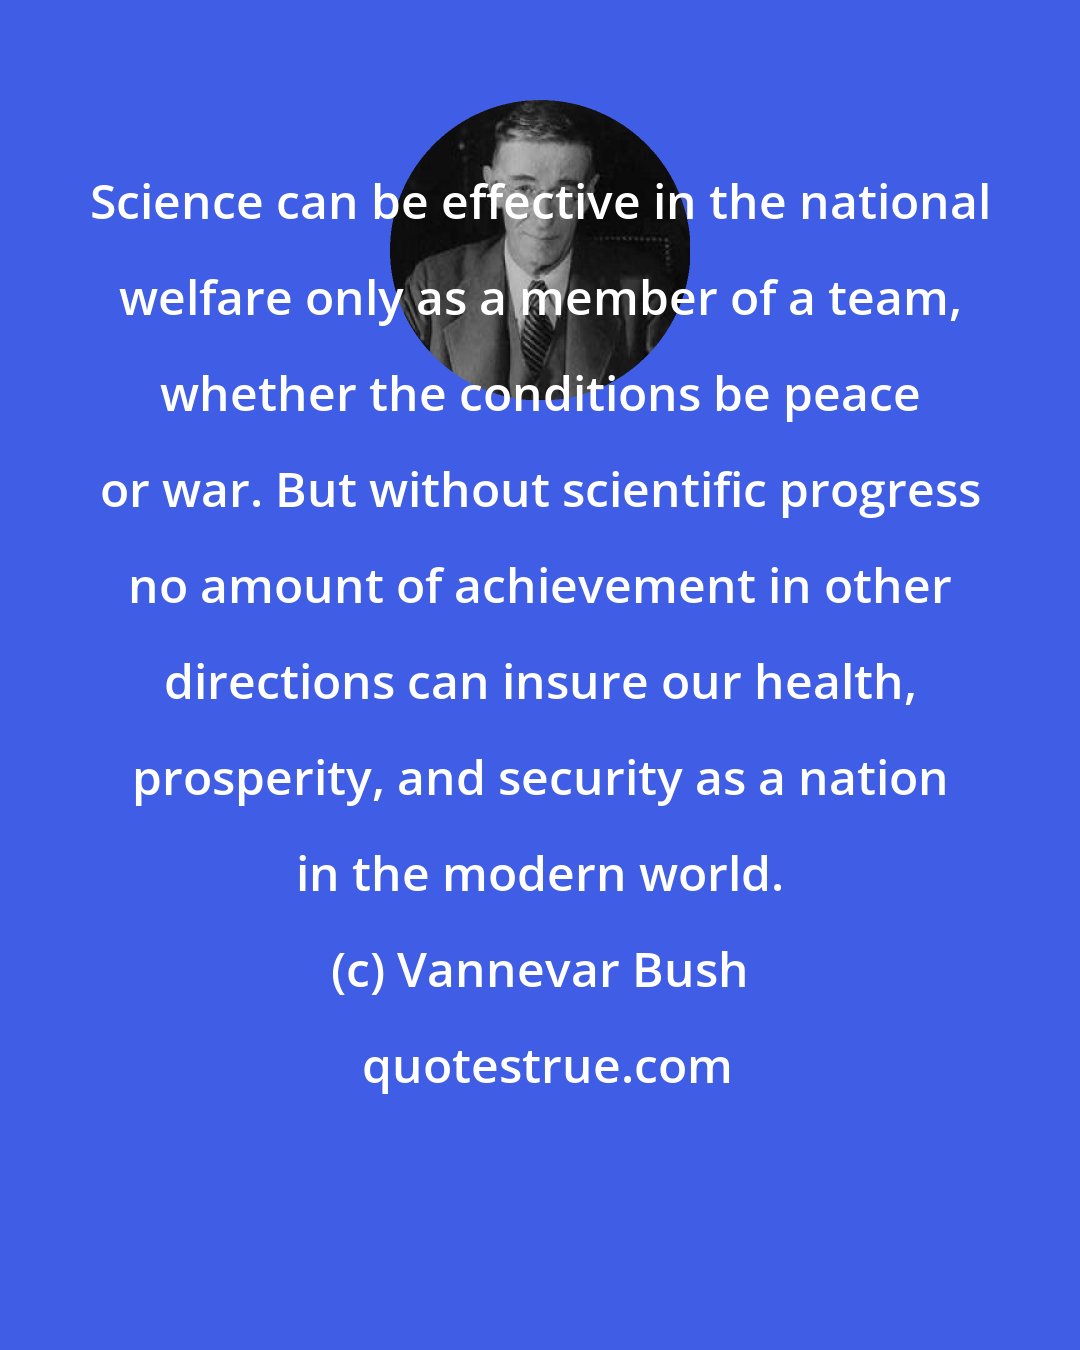 Vannevar Bush: Science can be effective in the national welfare only as a member of a team, whether the conditions be peace or war. But without scientific progress no amount of achievement in other directions can insure our health, prosperity, and security as a nation in the modern world.